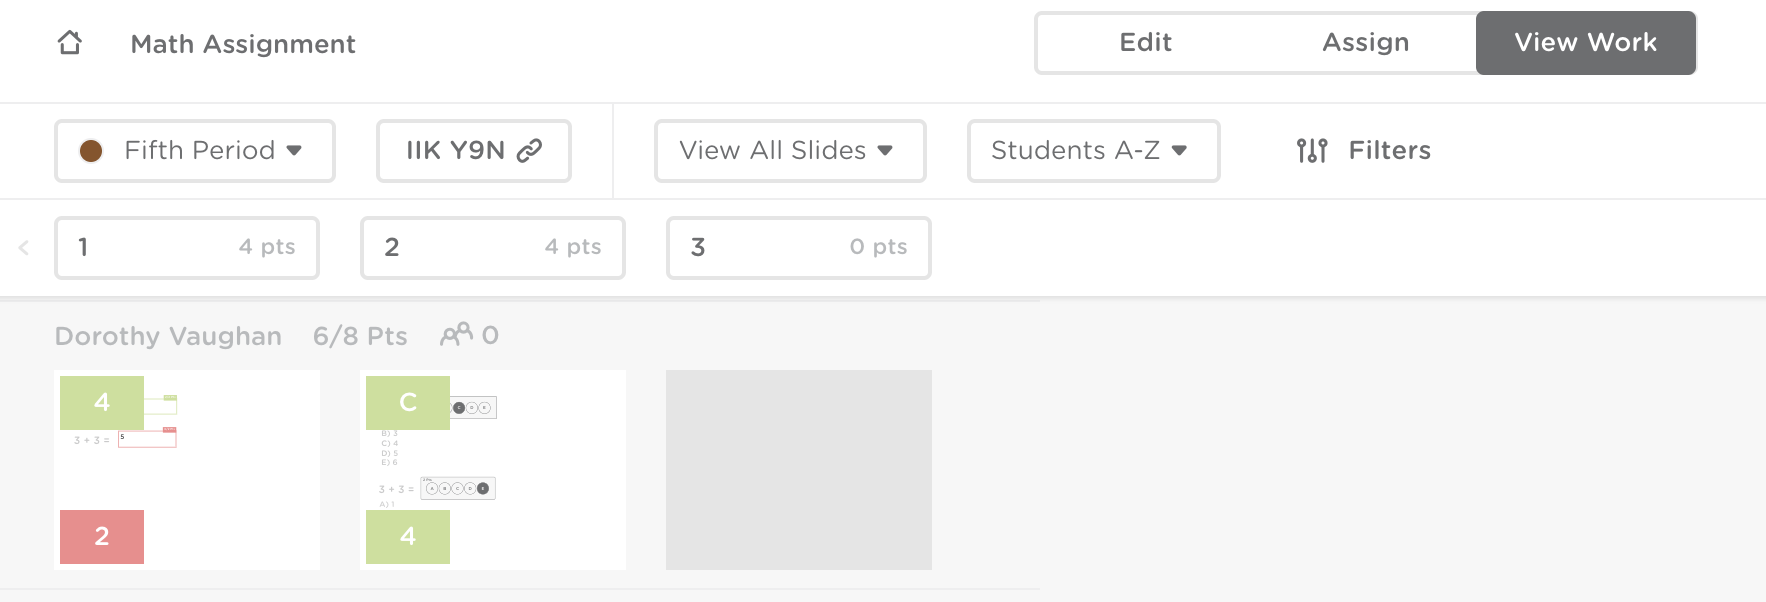 View work mode. The total number of points the student has gotten on the assignment is next to their name, and each thumbnail shows the total number of points the student has gotten on the slide.